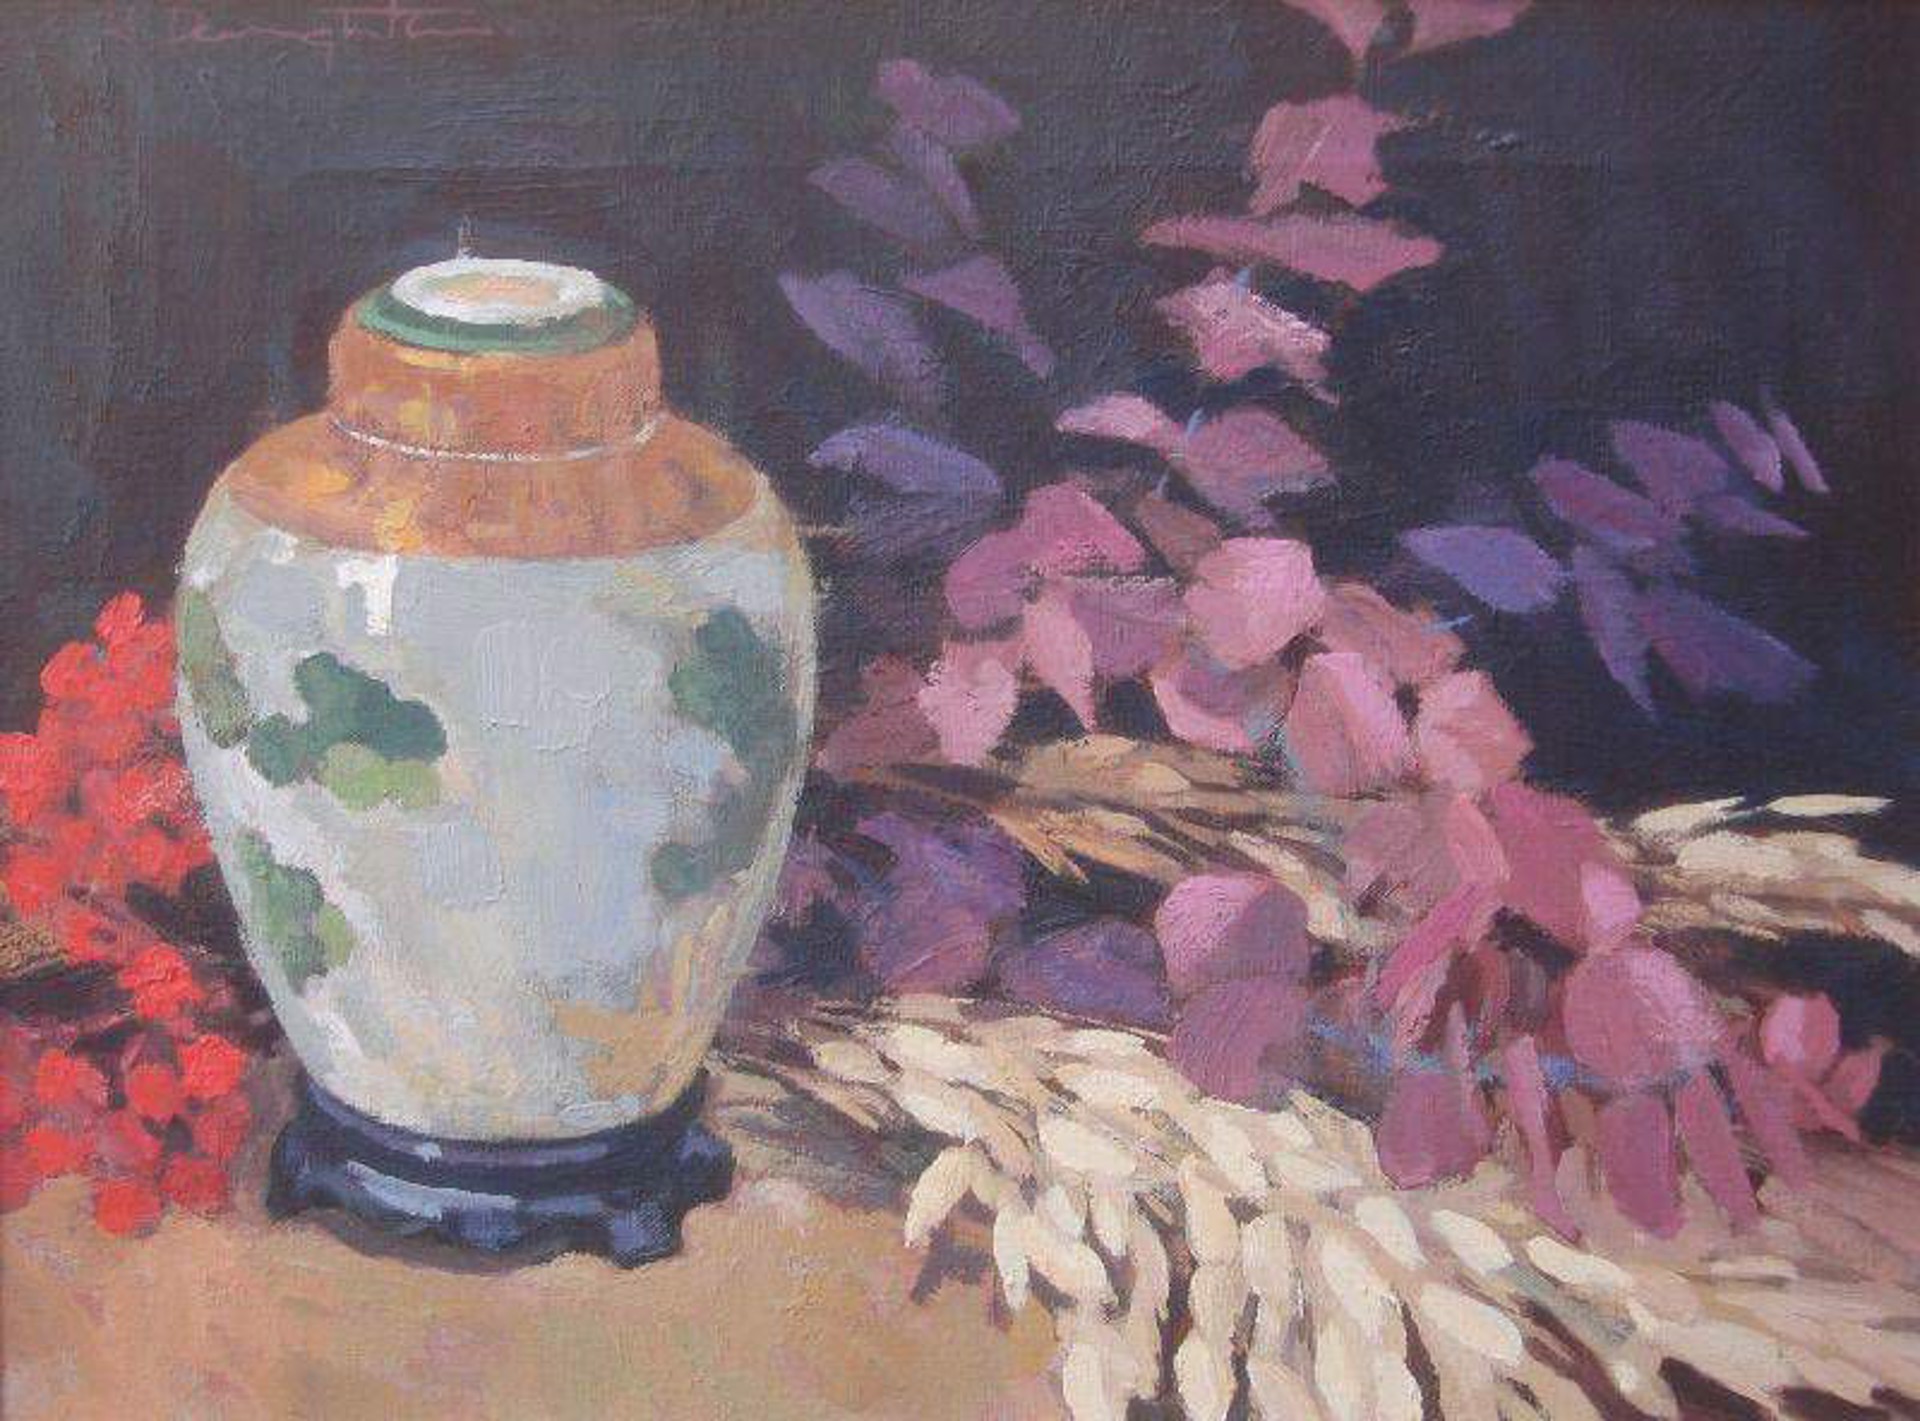 Still Life with Vase by Robert Daughters (1929-2013)